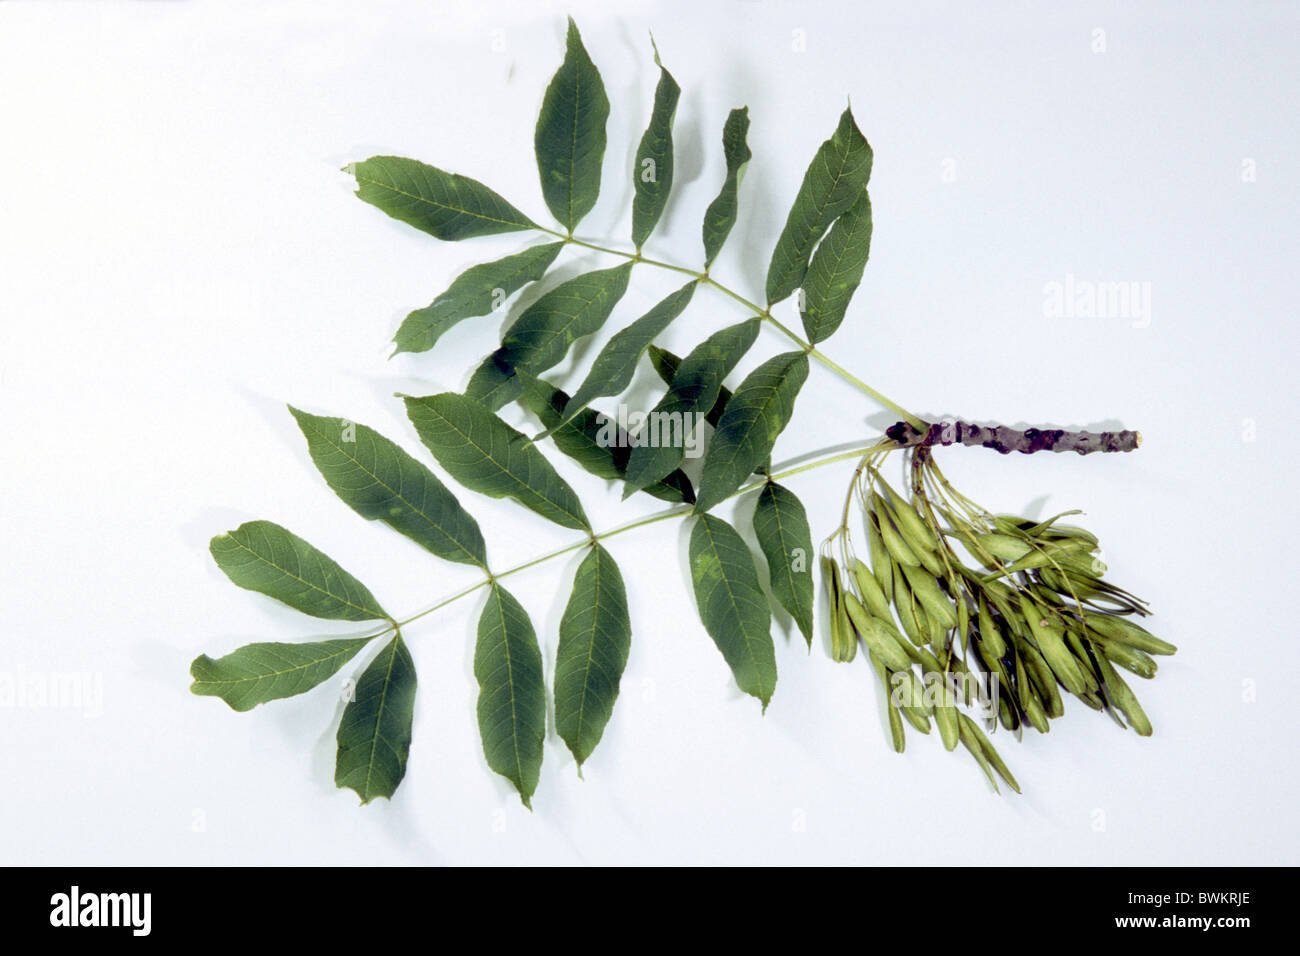 Common Ash, European Ash (Fraxinus excelsior), twig with leaves and fruit, studio picture. Stock Photo